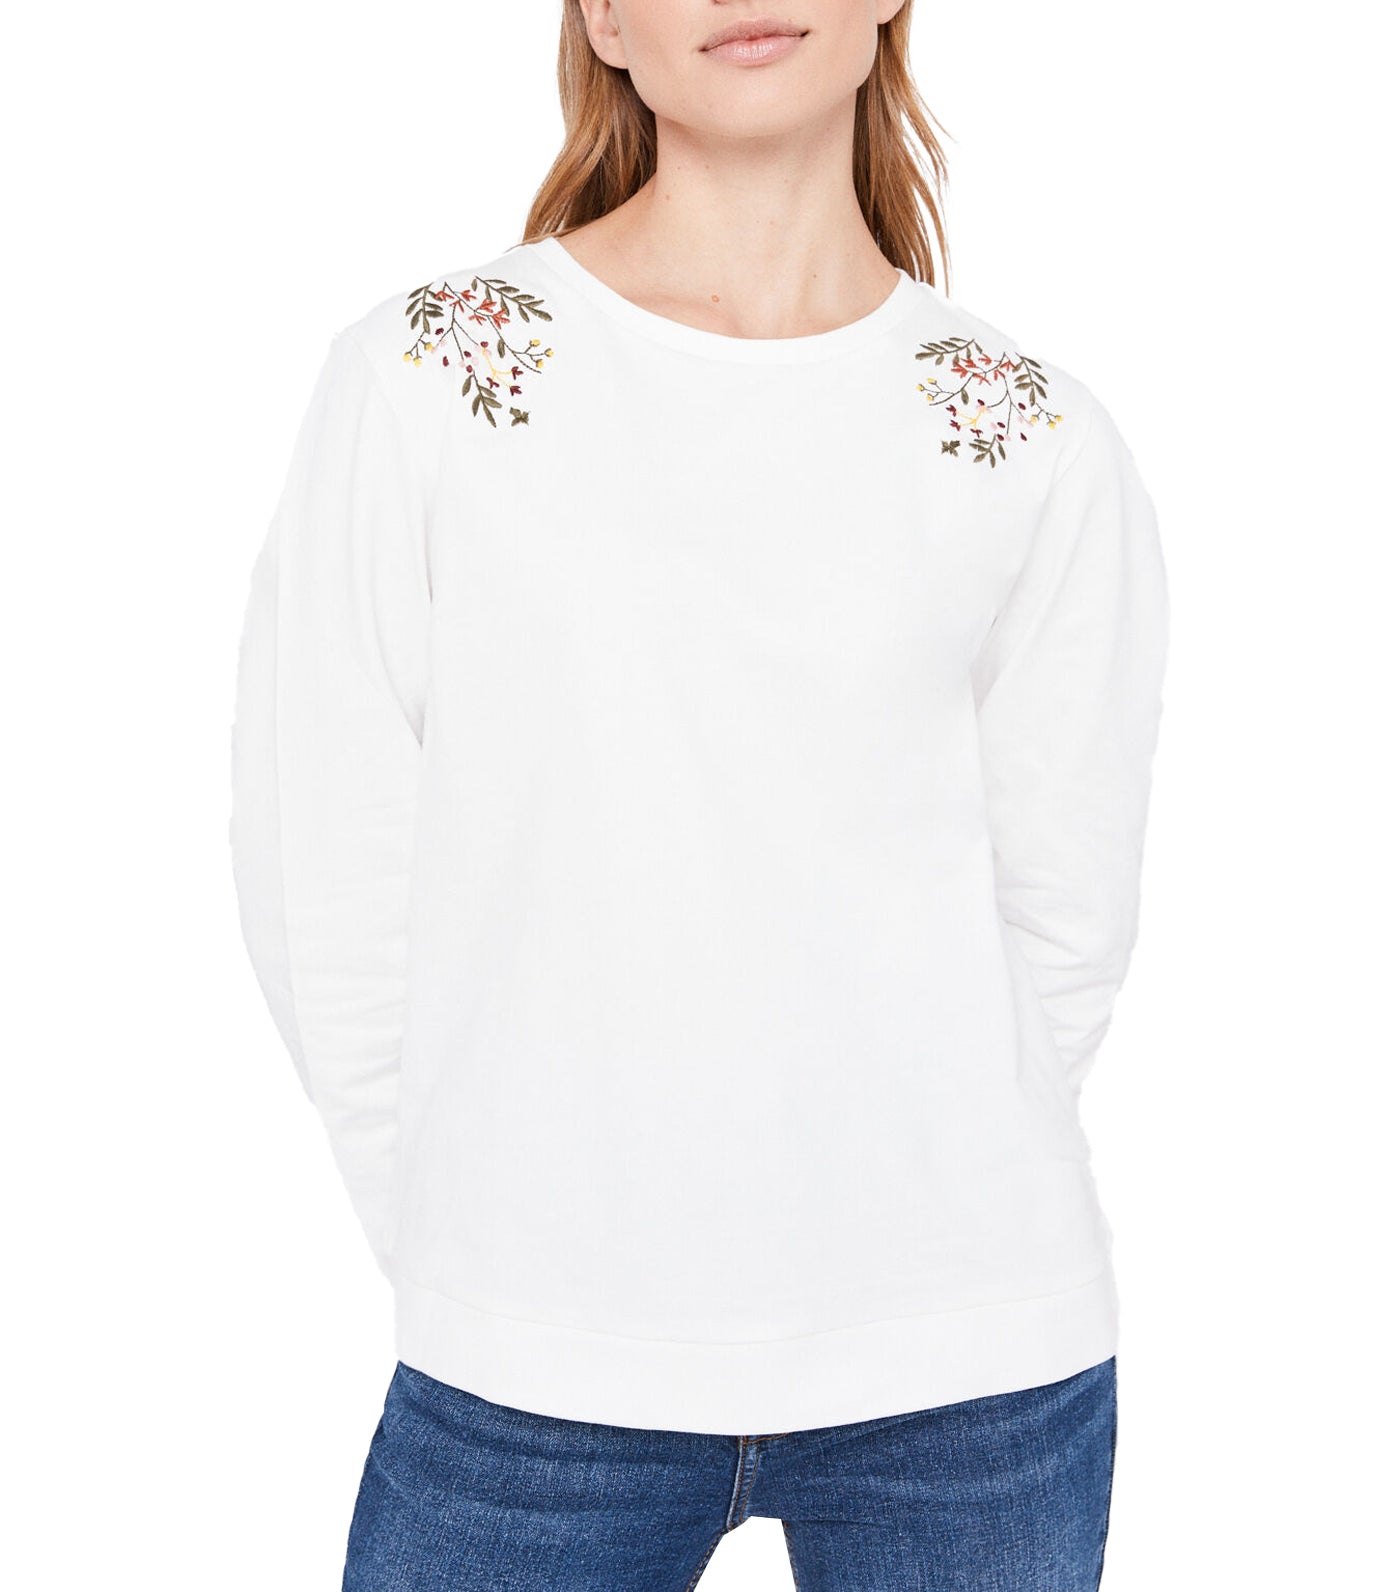 Floral Embroidered Sweatshirt White